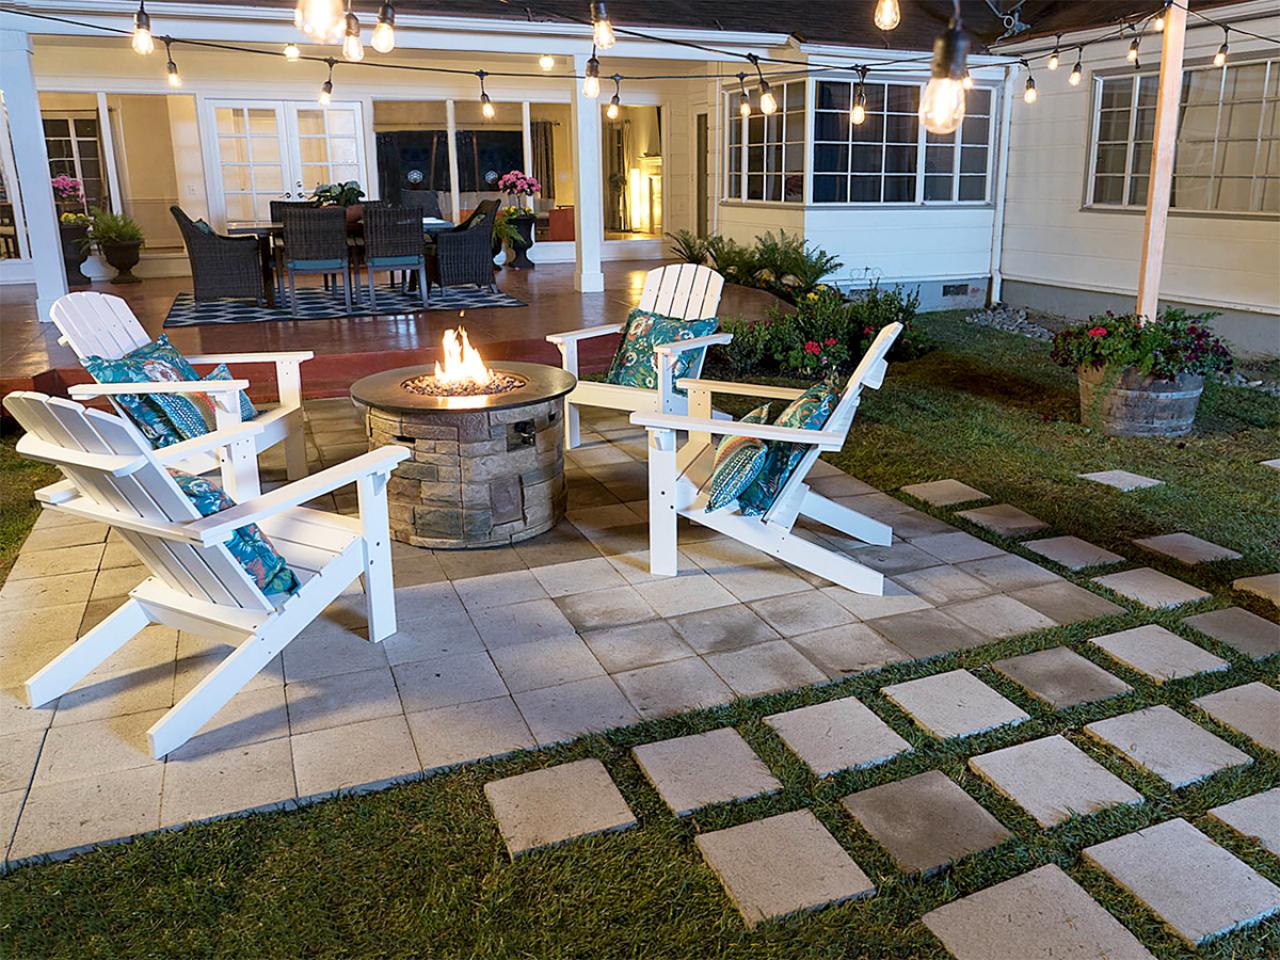 How To Lay A Paver Patio For Firepit Diy - How To Make A Patio Fire Pit